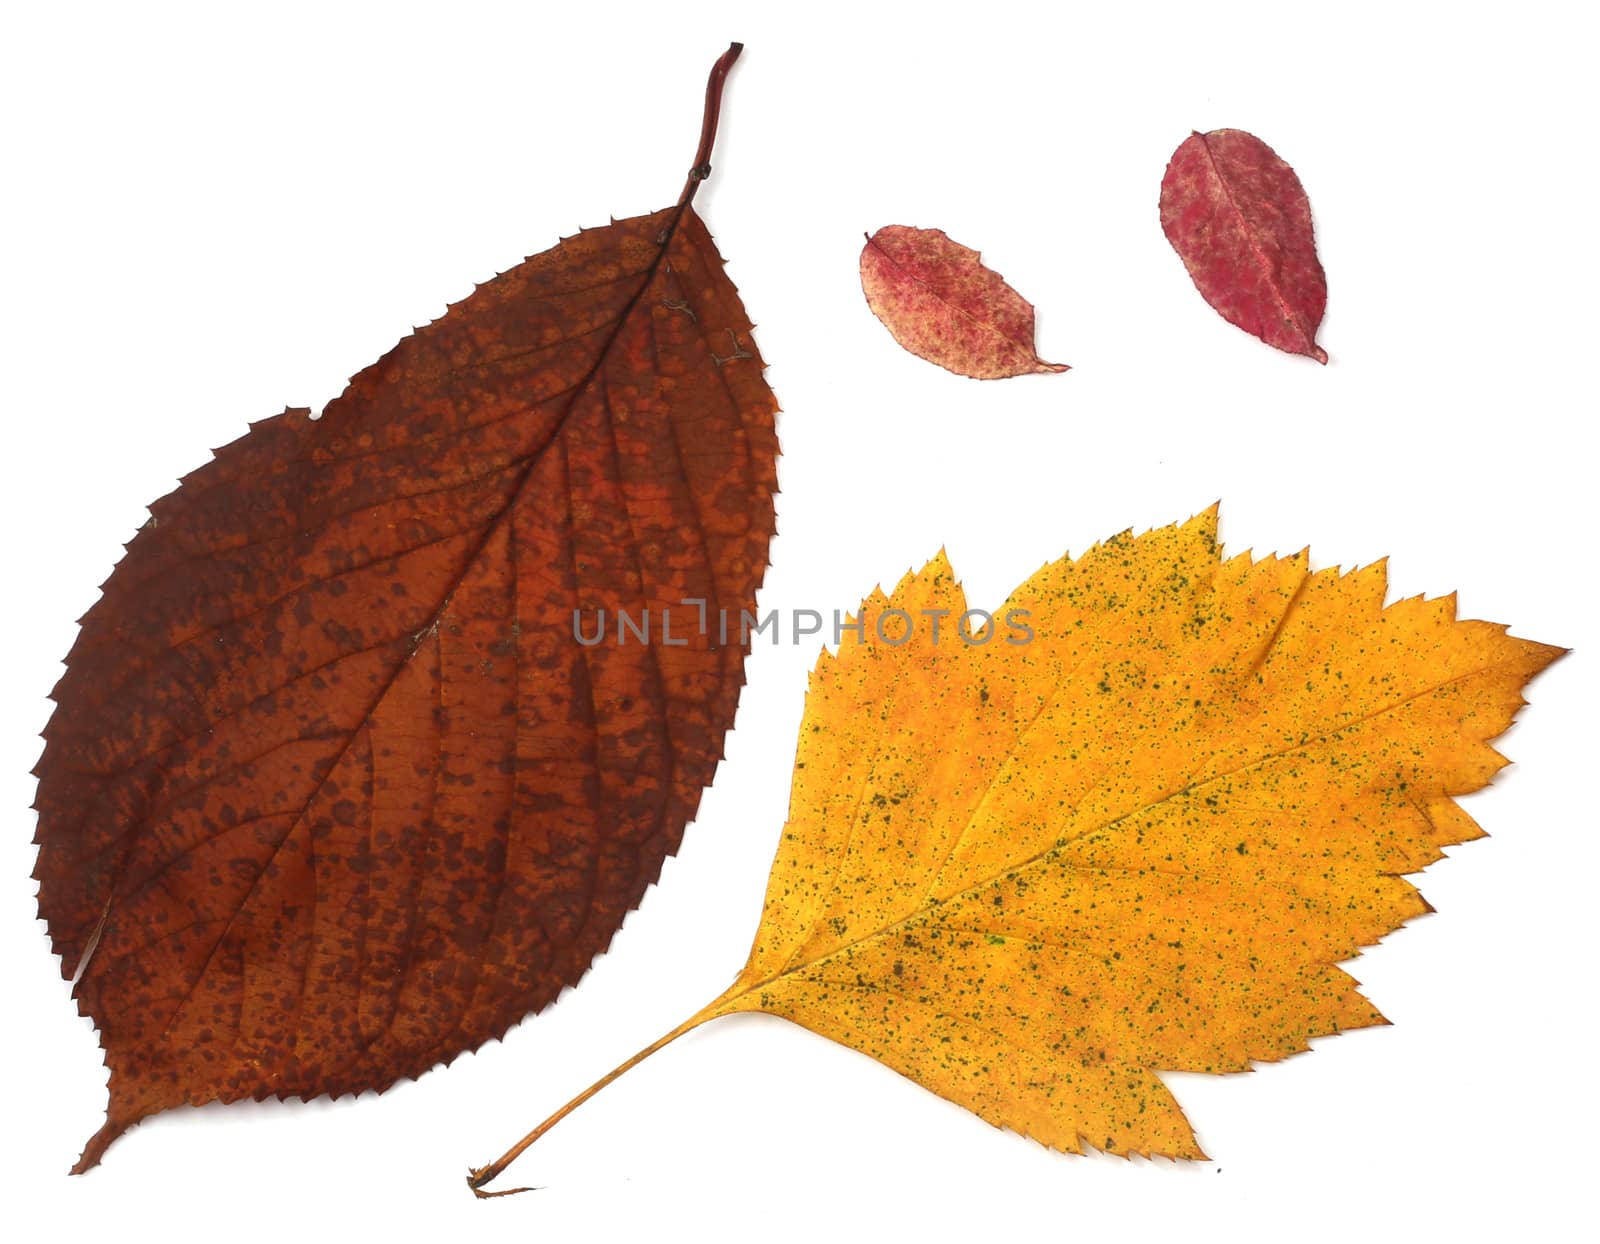 Collection set of beautiful autumn leaves isolated on white background